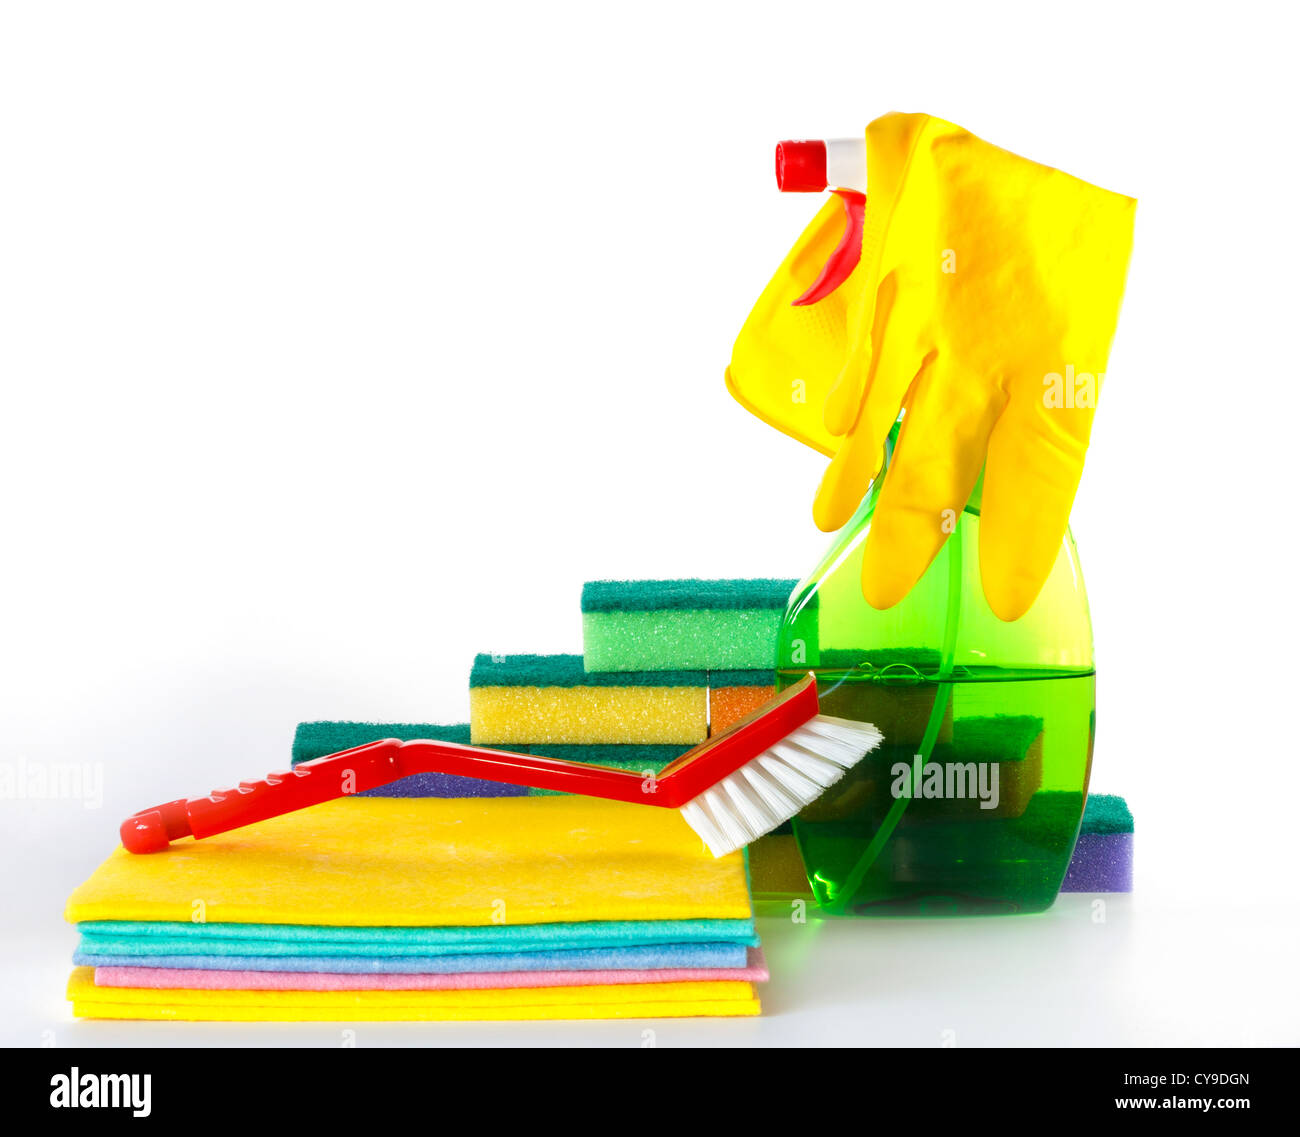 Various cleaning products displayed against a white background Stock Photo